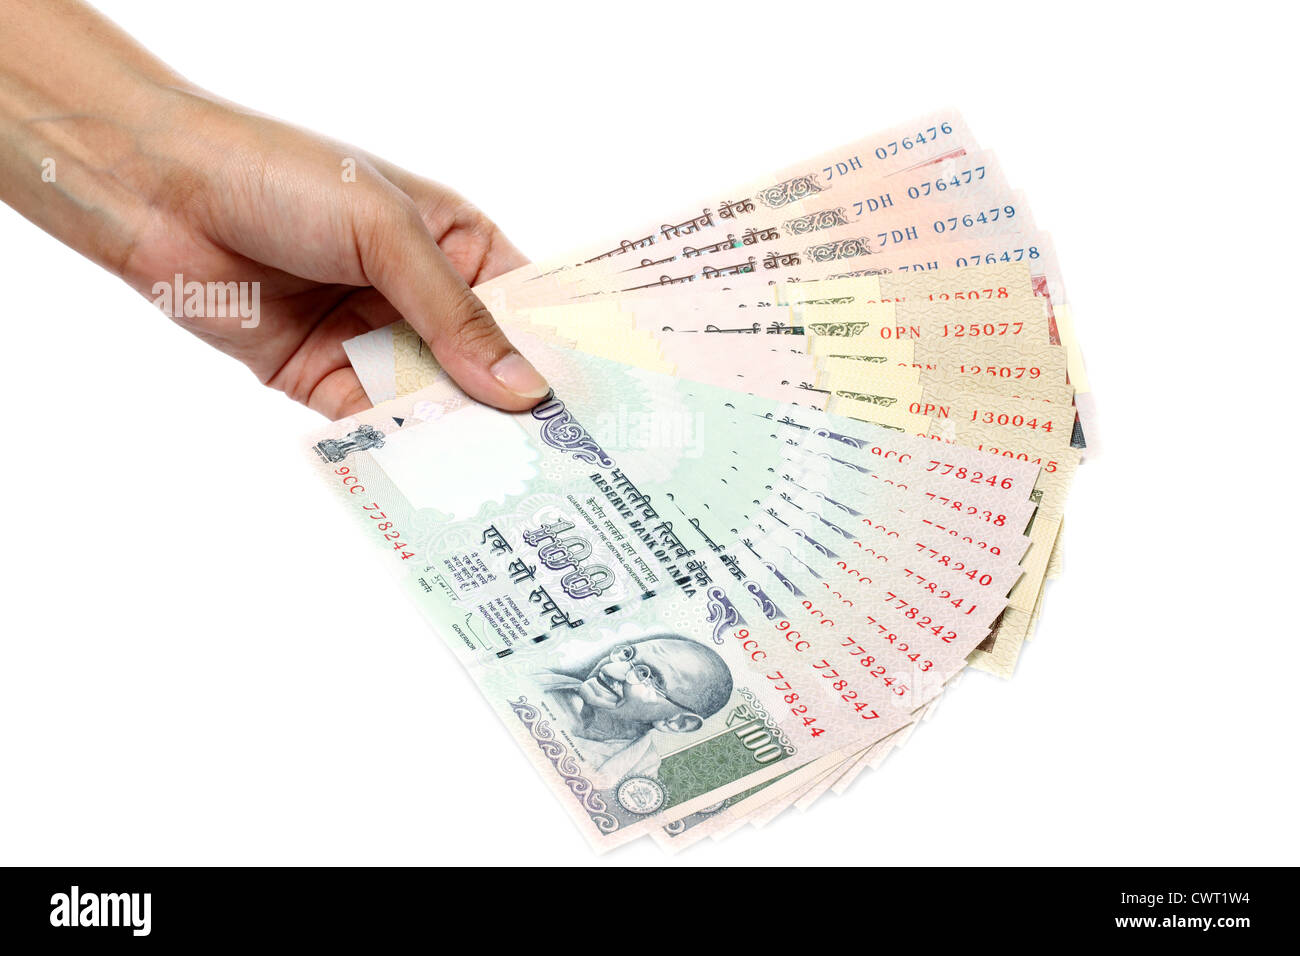 Hand holding Indian rupee notes on white background Stock Photo